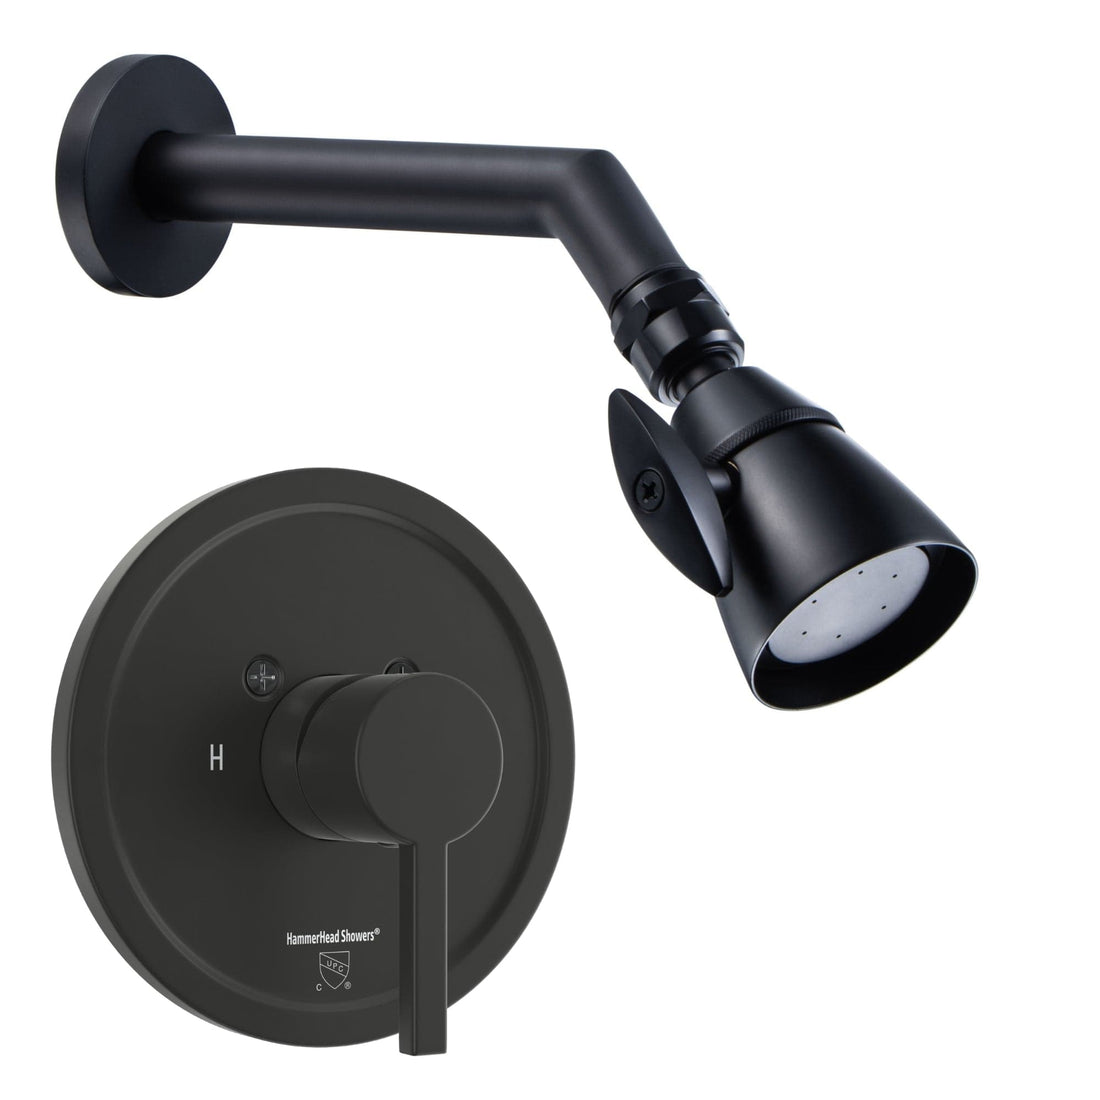 Main Image All Metal 2-Inch High Pressure Shower Head Set - Complete Shower System with Valve and Trim Matte Black  / 2.5 - The Shower Head Store